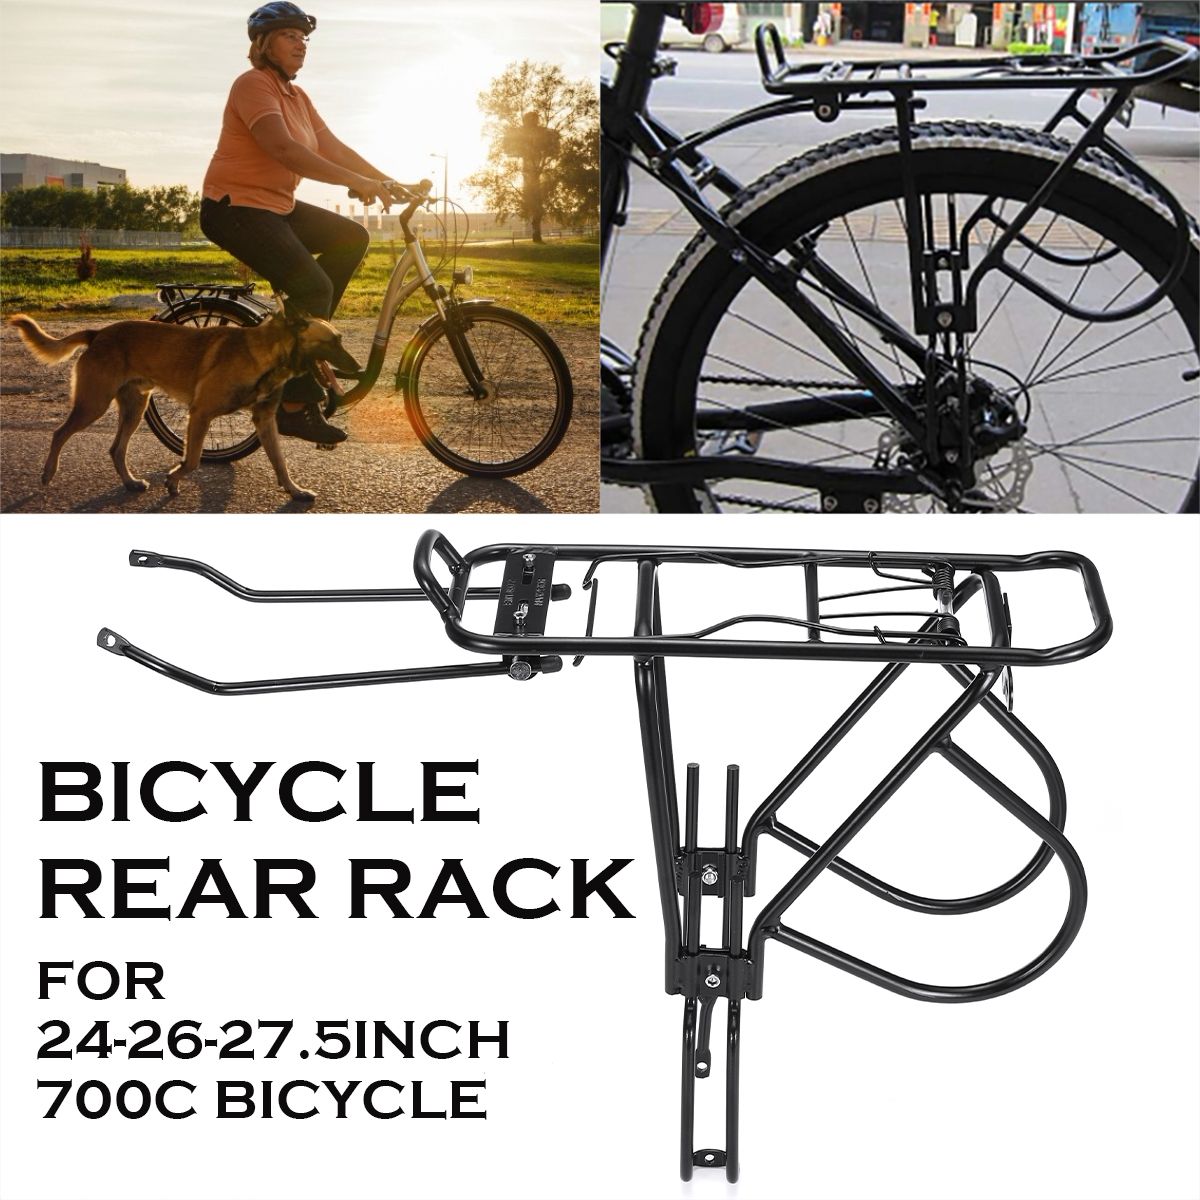 60KG-Alloy-Rear-Bicycle-Bike-Pannier-Cargo-Rack-Carrier-Bag-Luggage-Cycle-Mountain-MTB-1637542